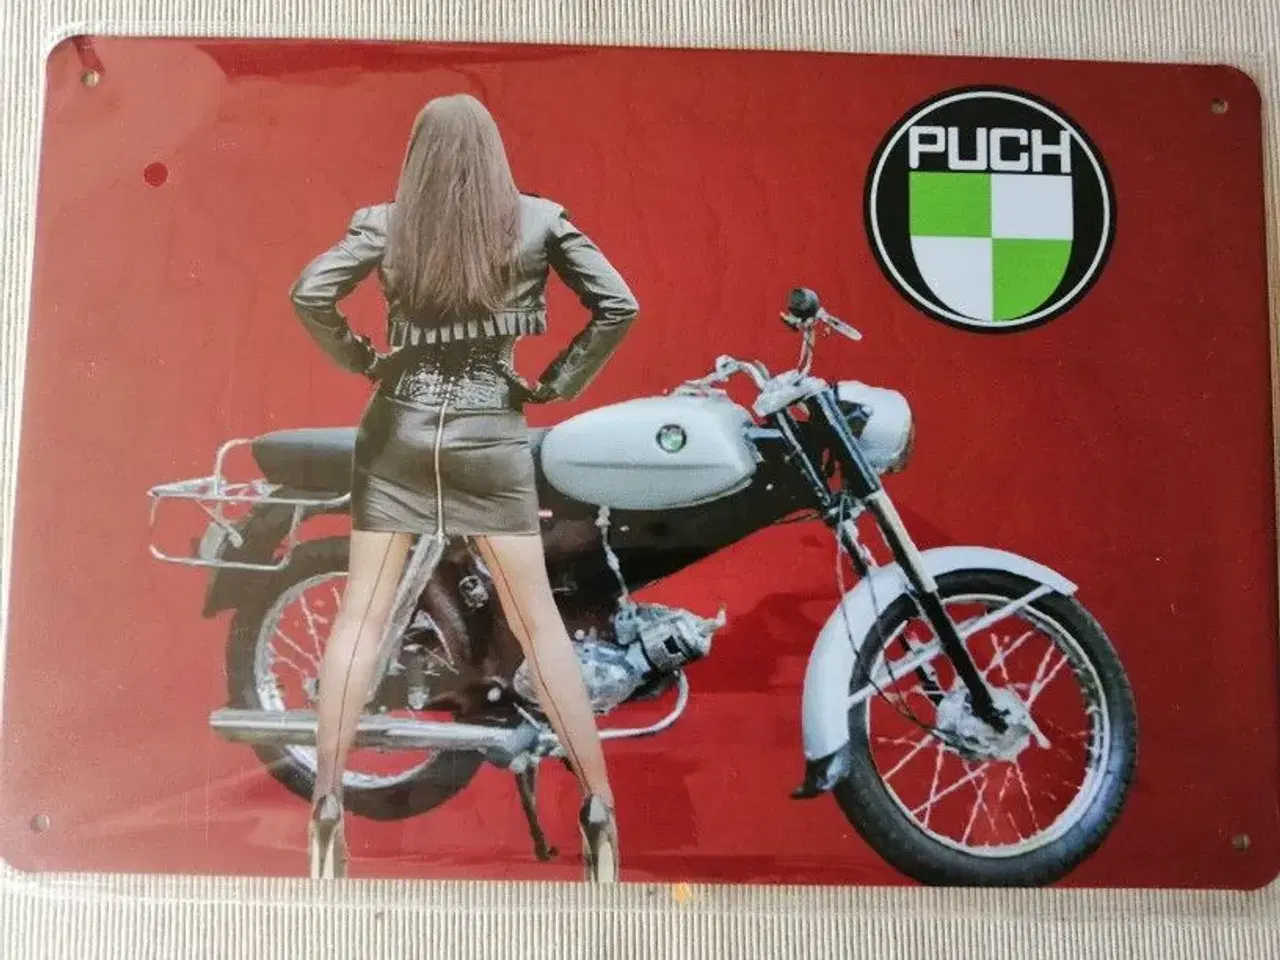 Billede 14 - puch maxi, puch mz50, puch monza juvel, puch ms50 